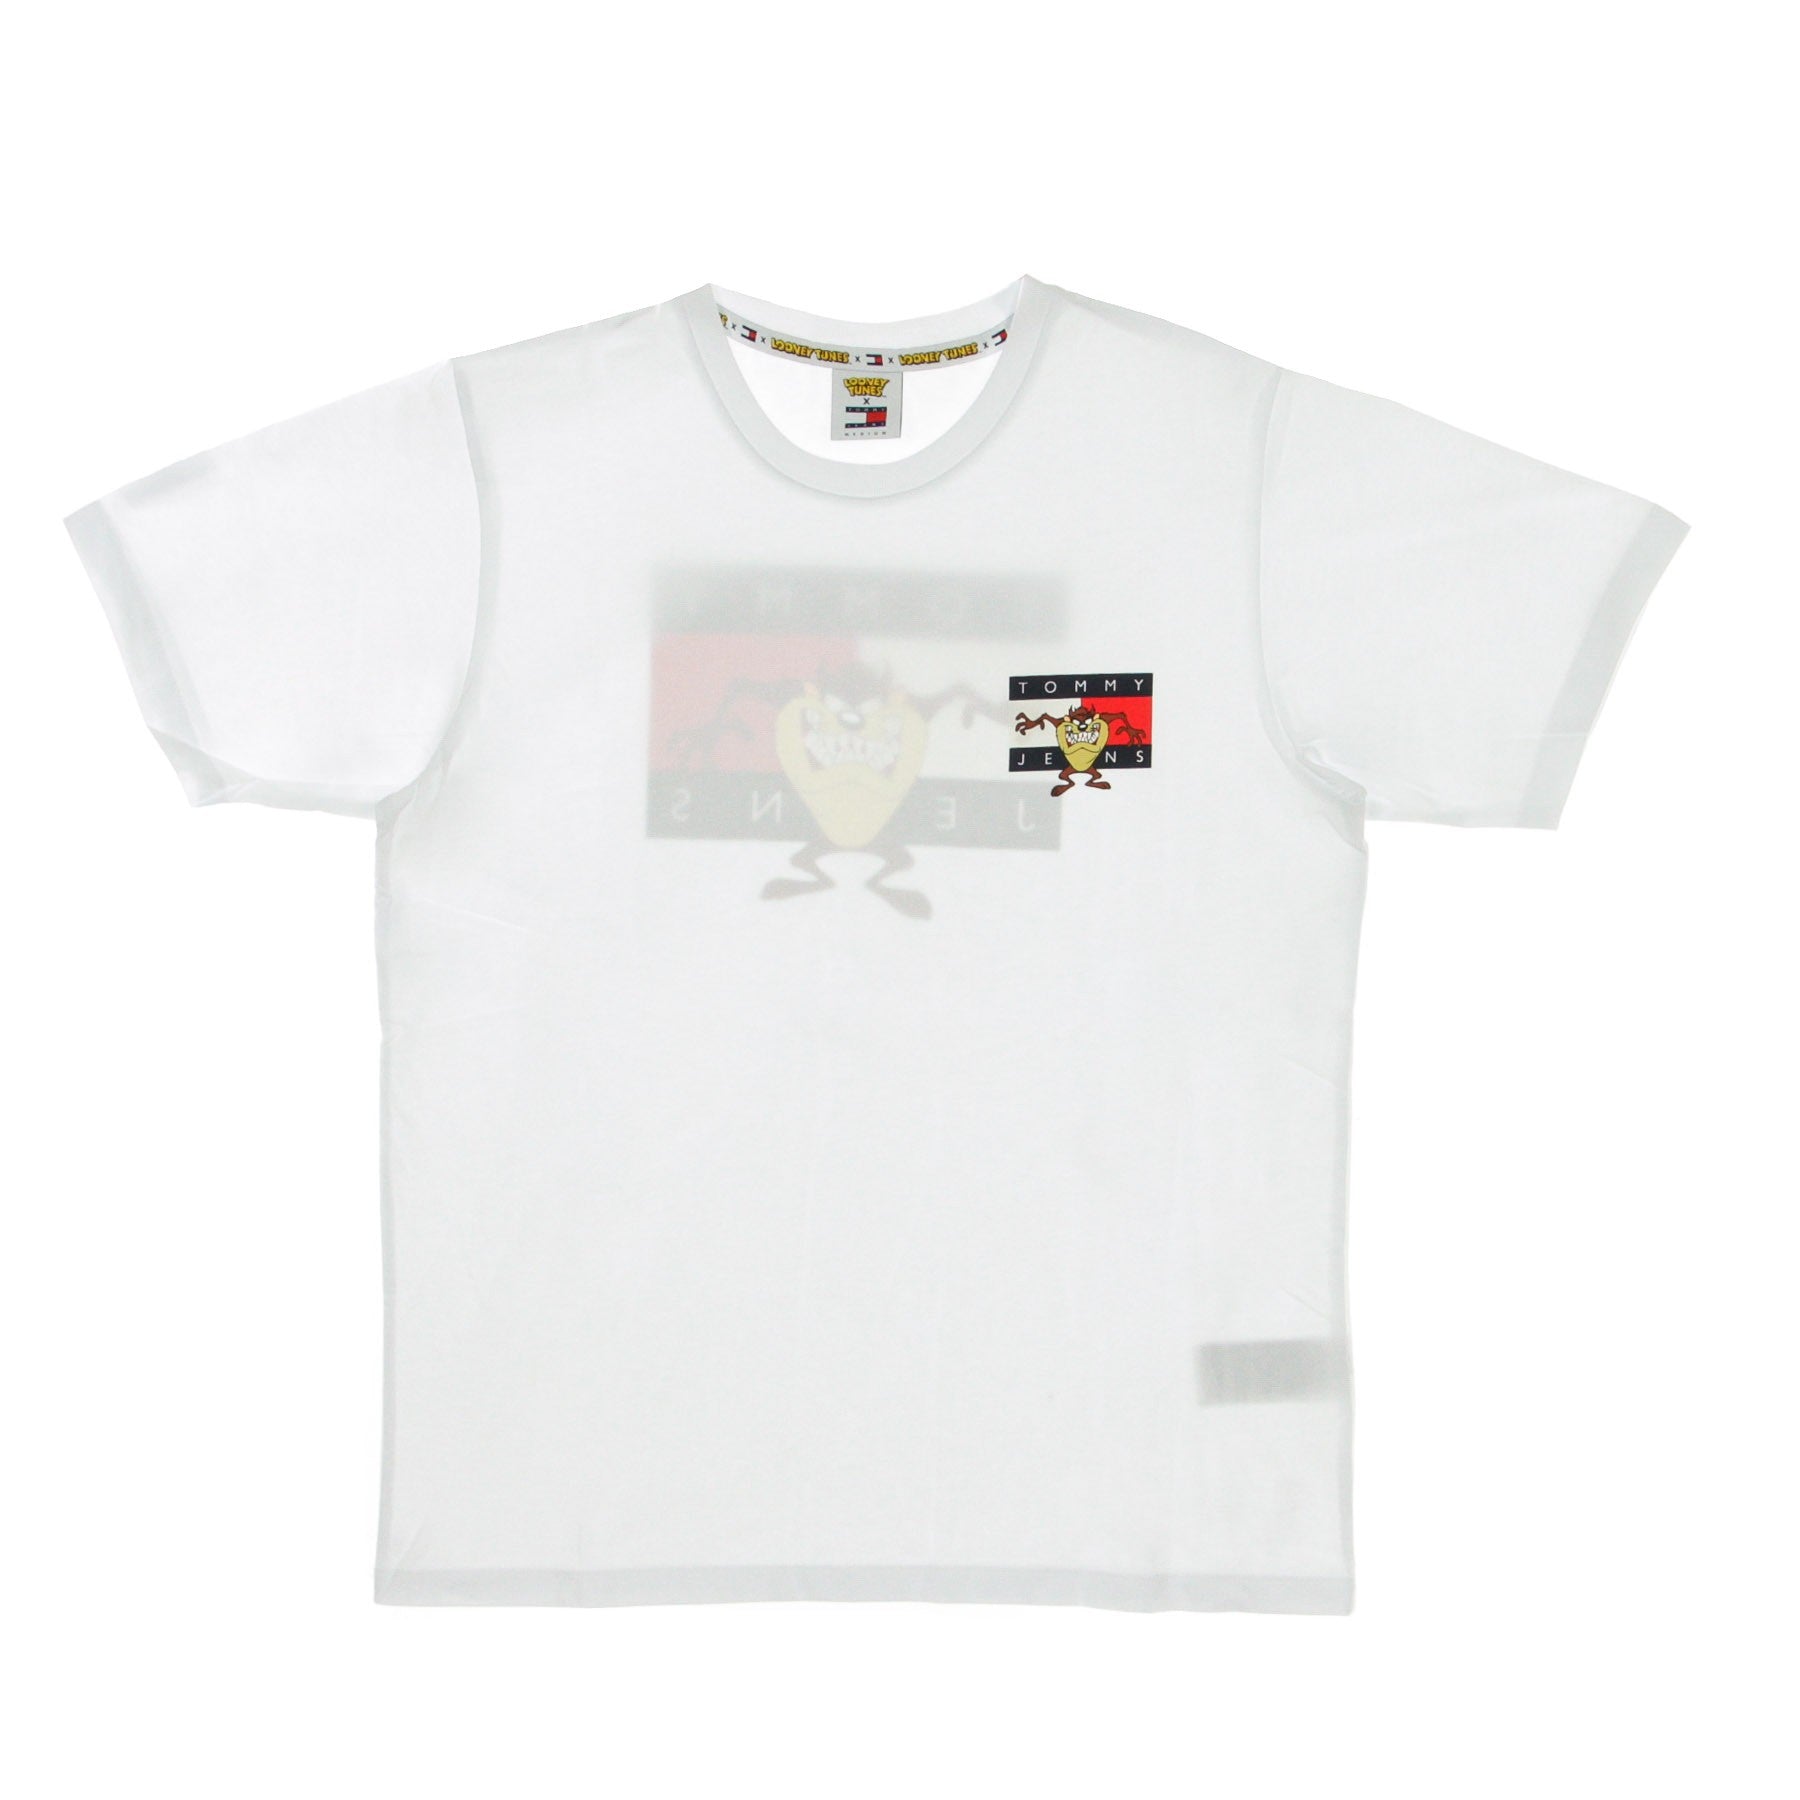 Tommy Tee X Looney Tunes Women's T-Shirt